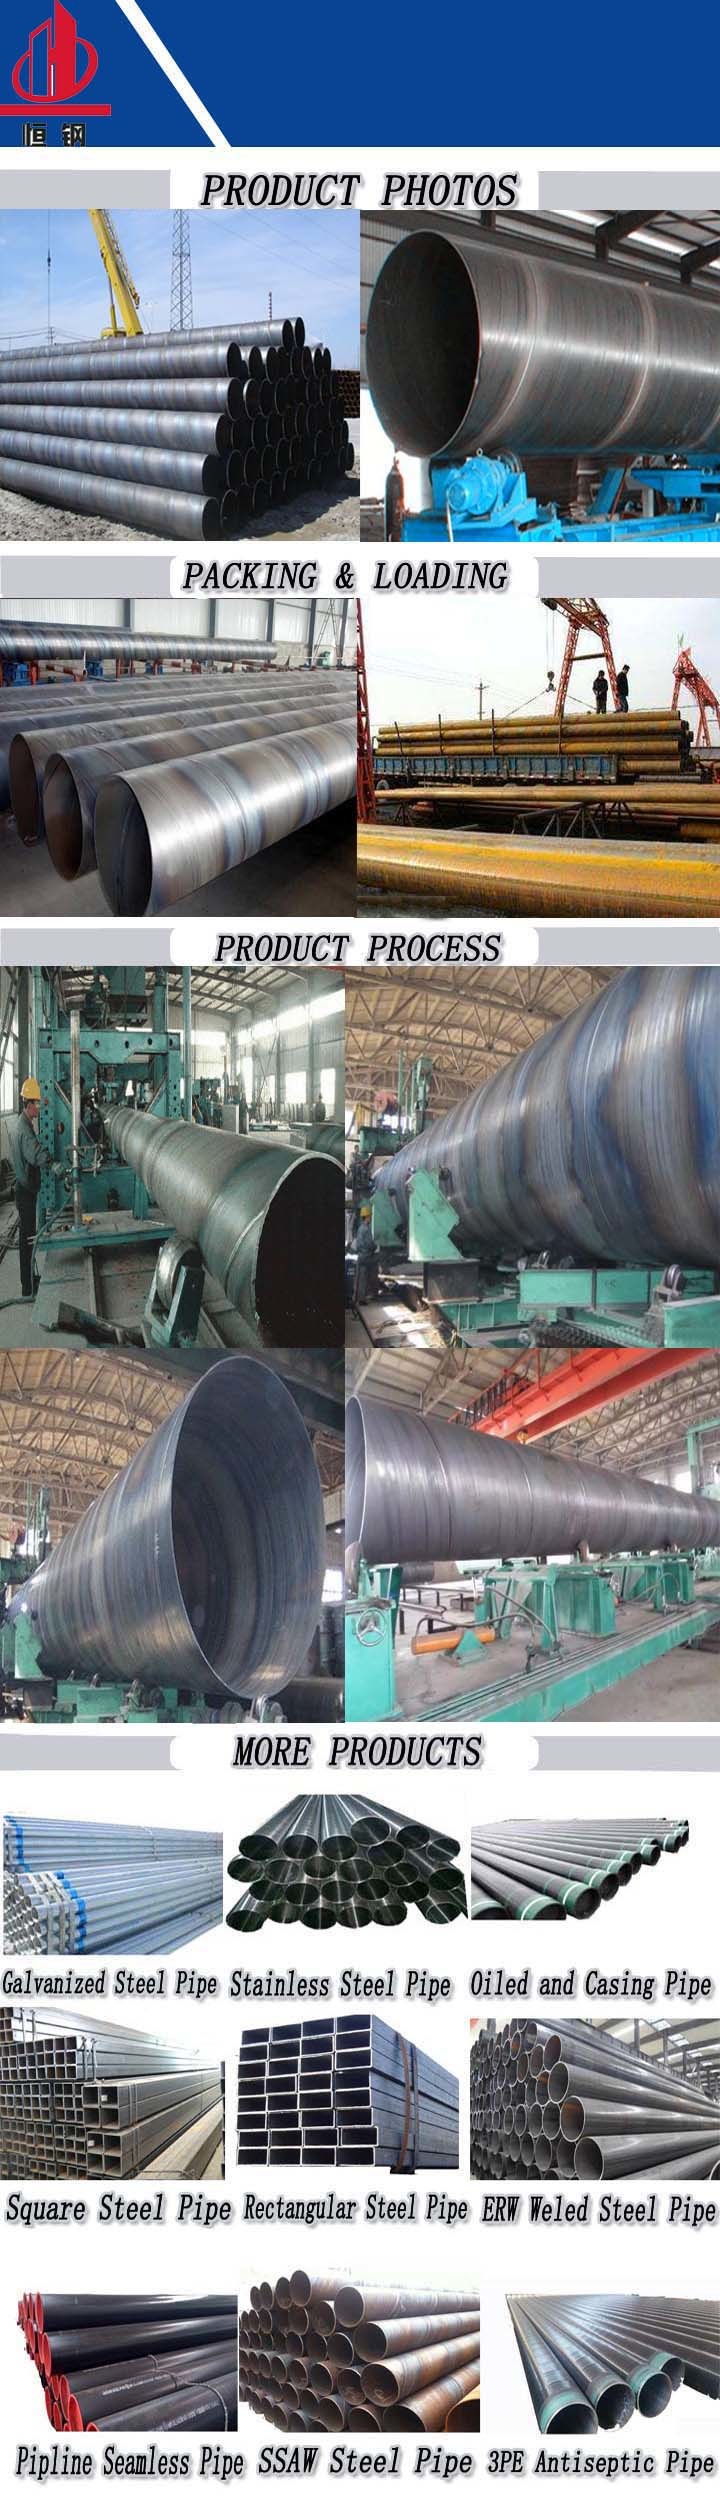 API 5L Psl 1 Gr. B SSAW Welded Carbon Steel Pipe